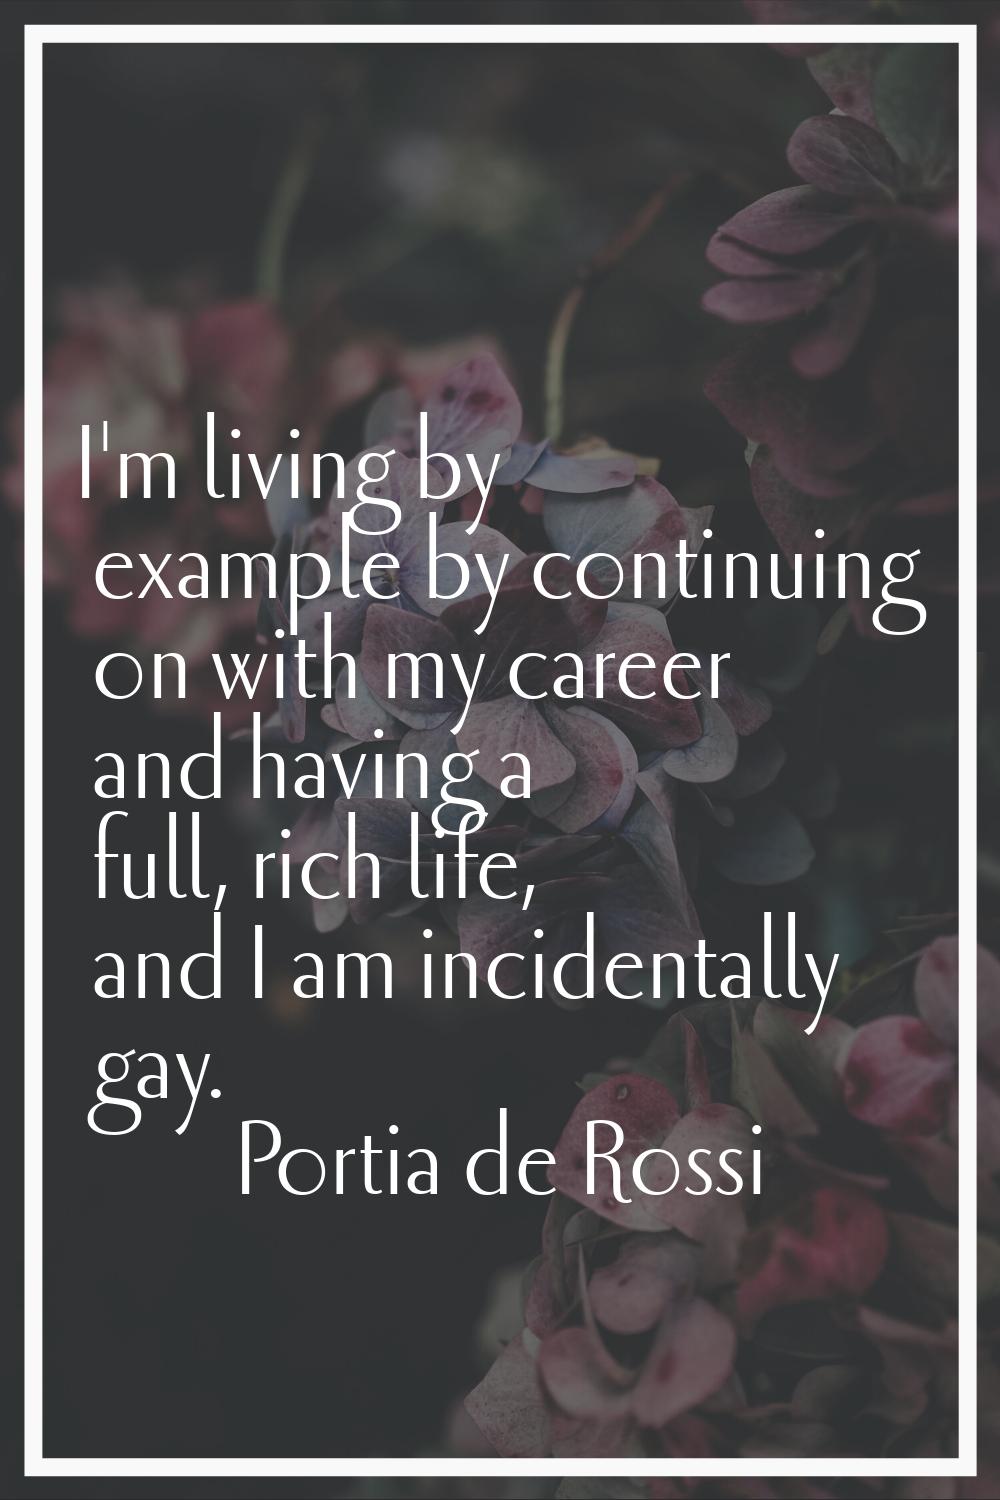 I'm living by example by continuing on with my career and having a full, rich life, and I am incide